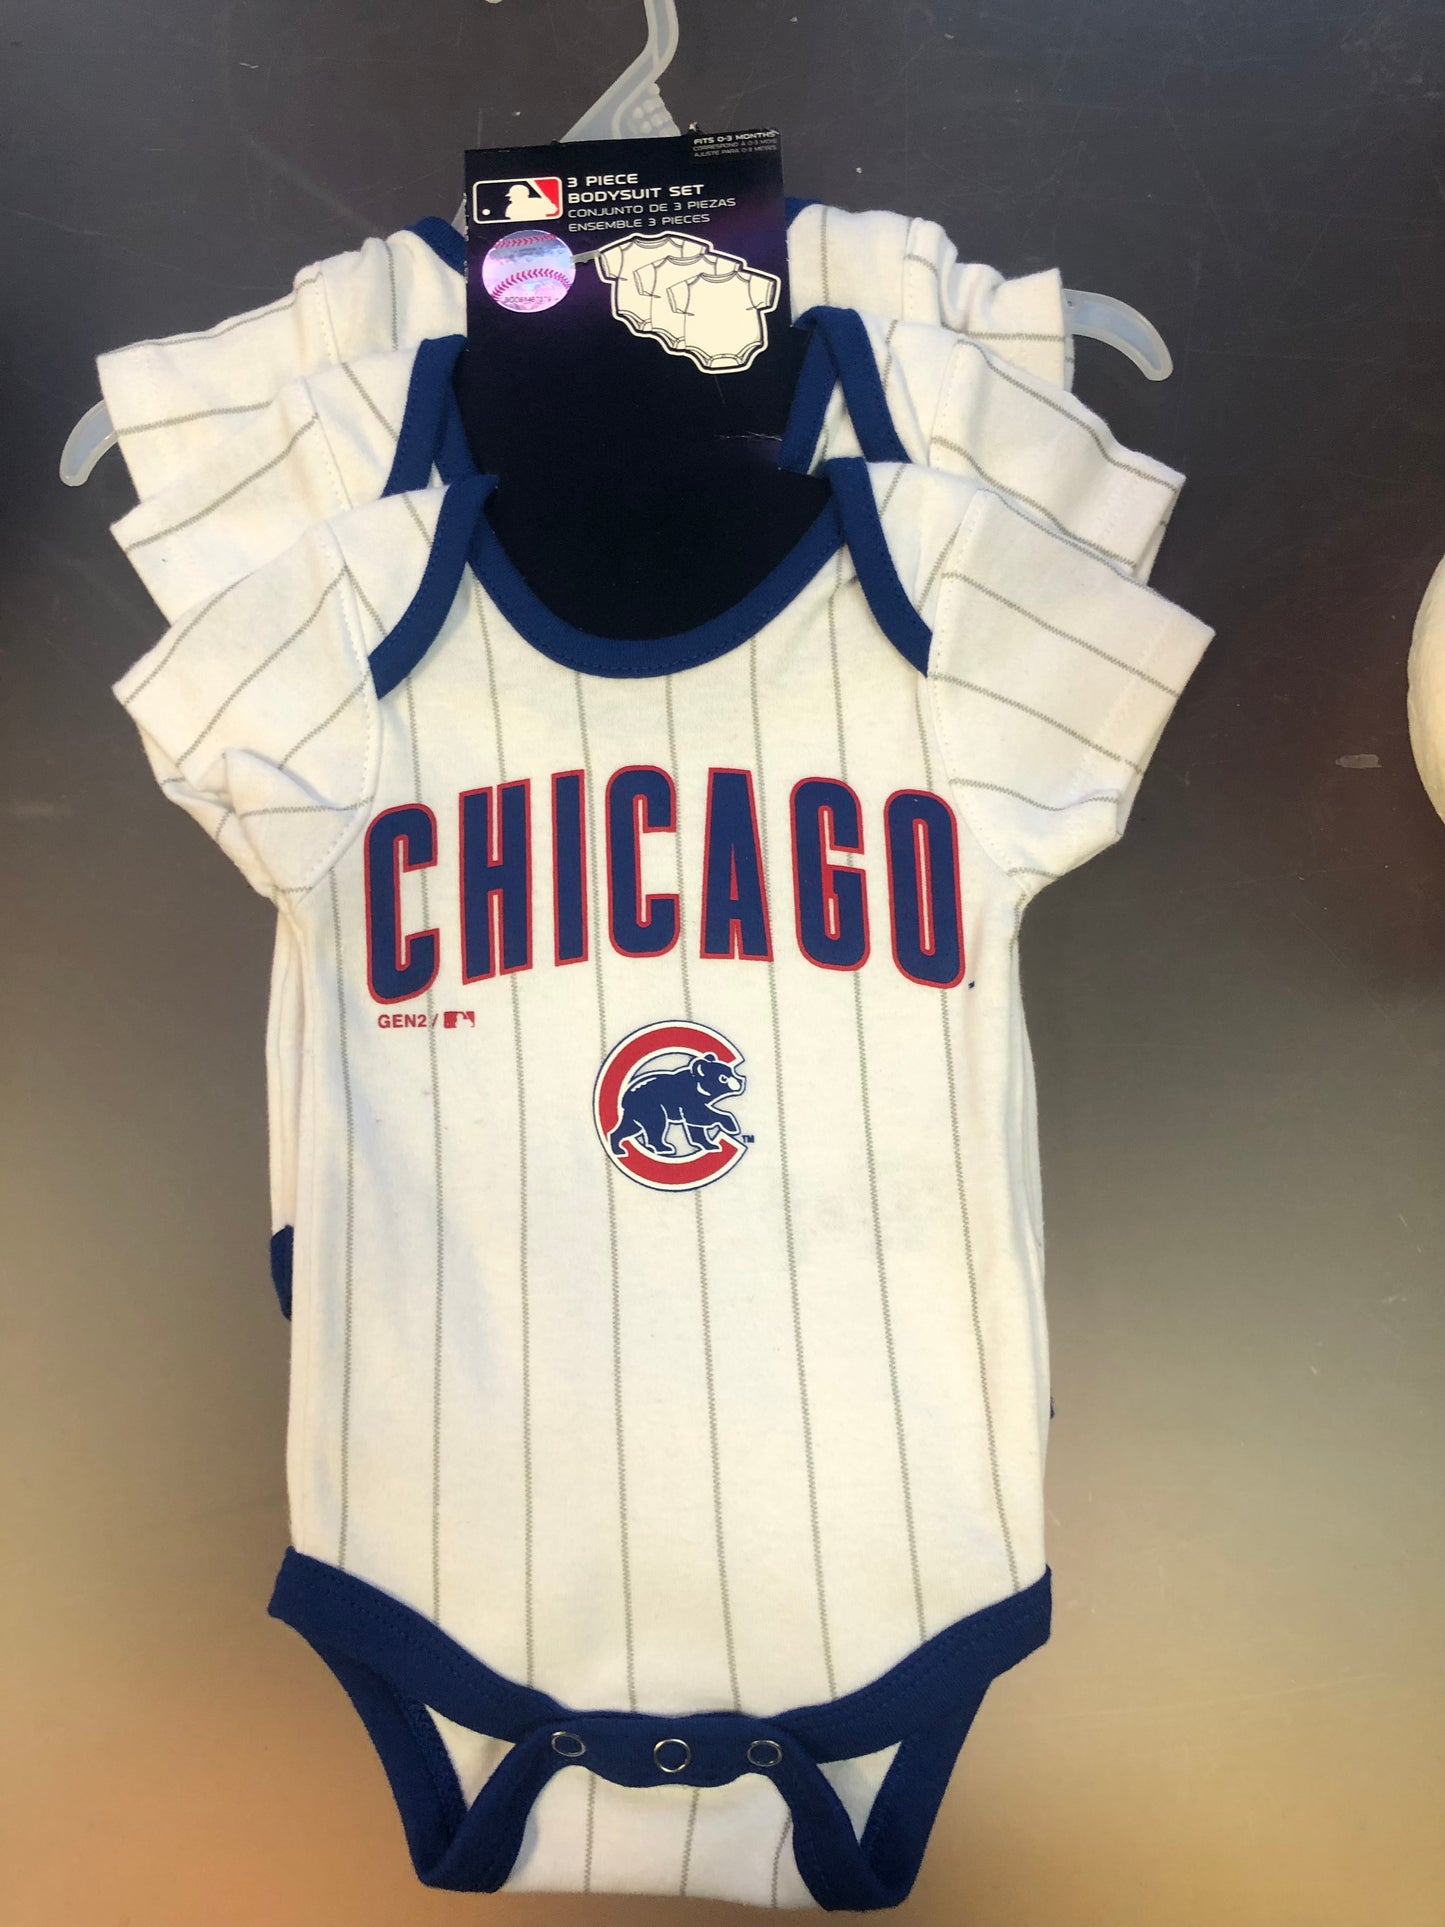 Chicago Cubs Infant Baby 3 Piece Body Suit Set "Lil' Jersey" White 3 Pack